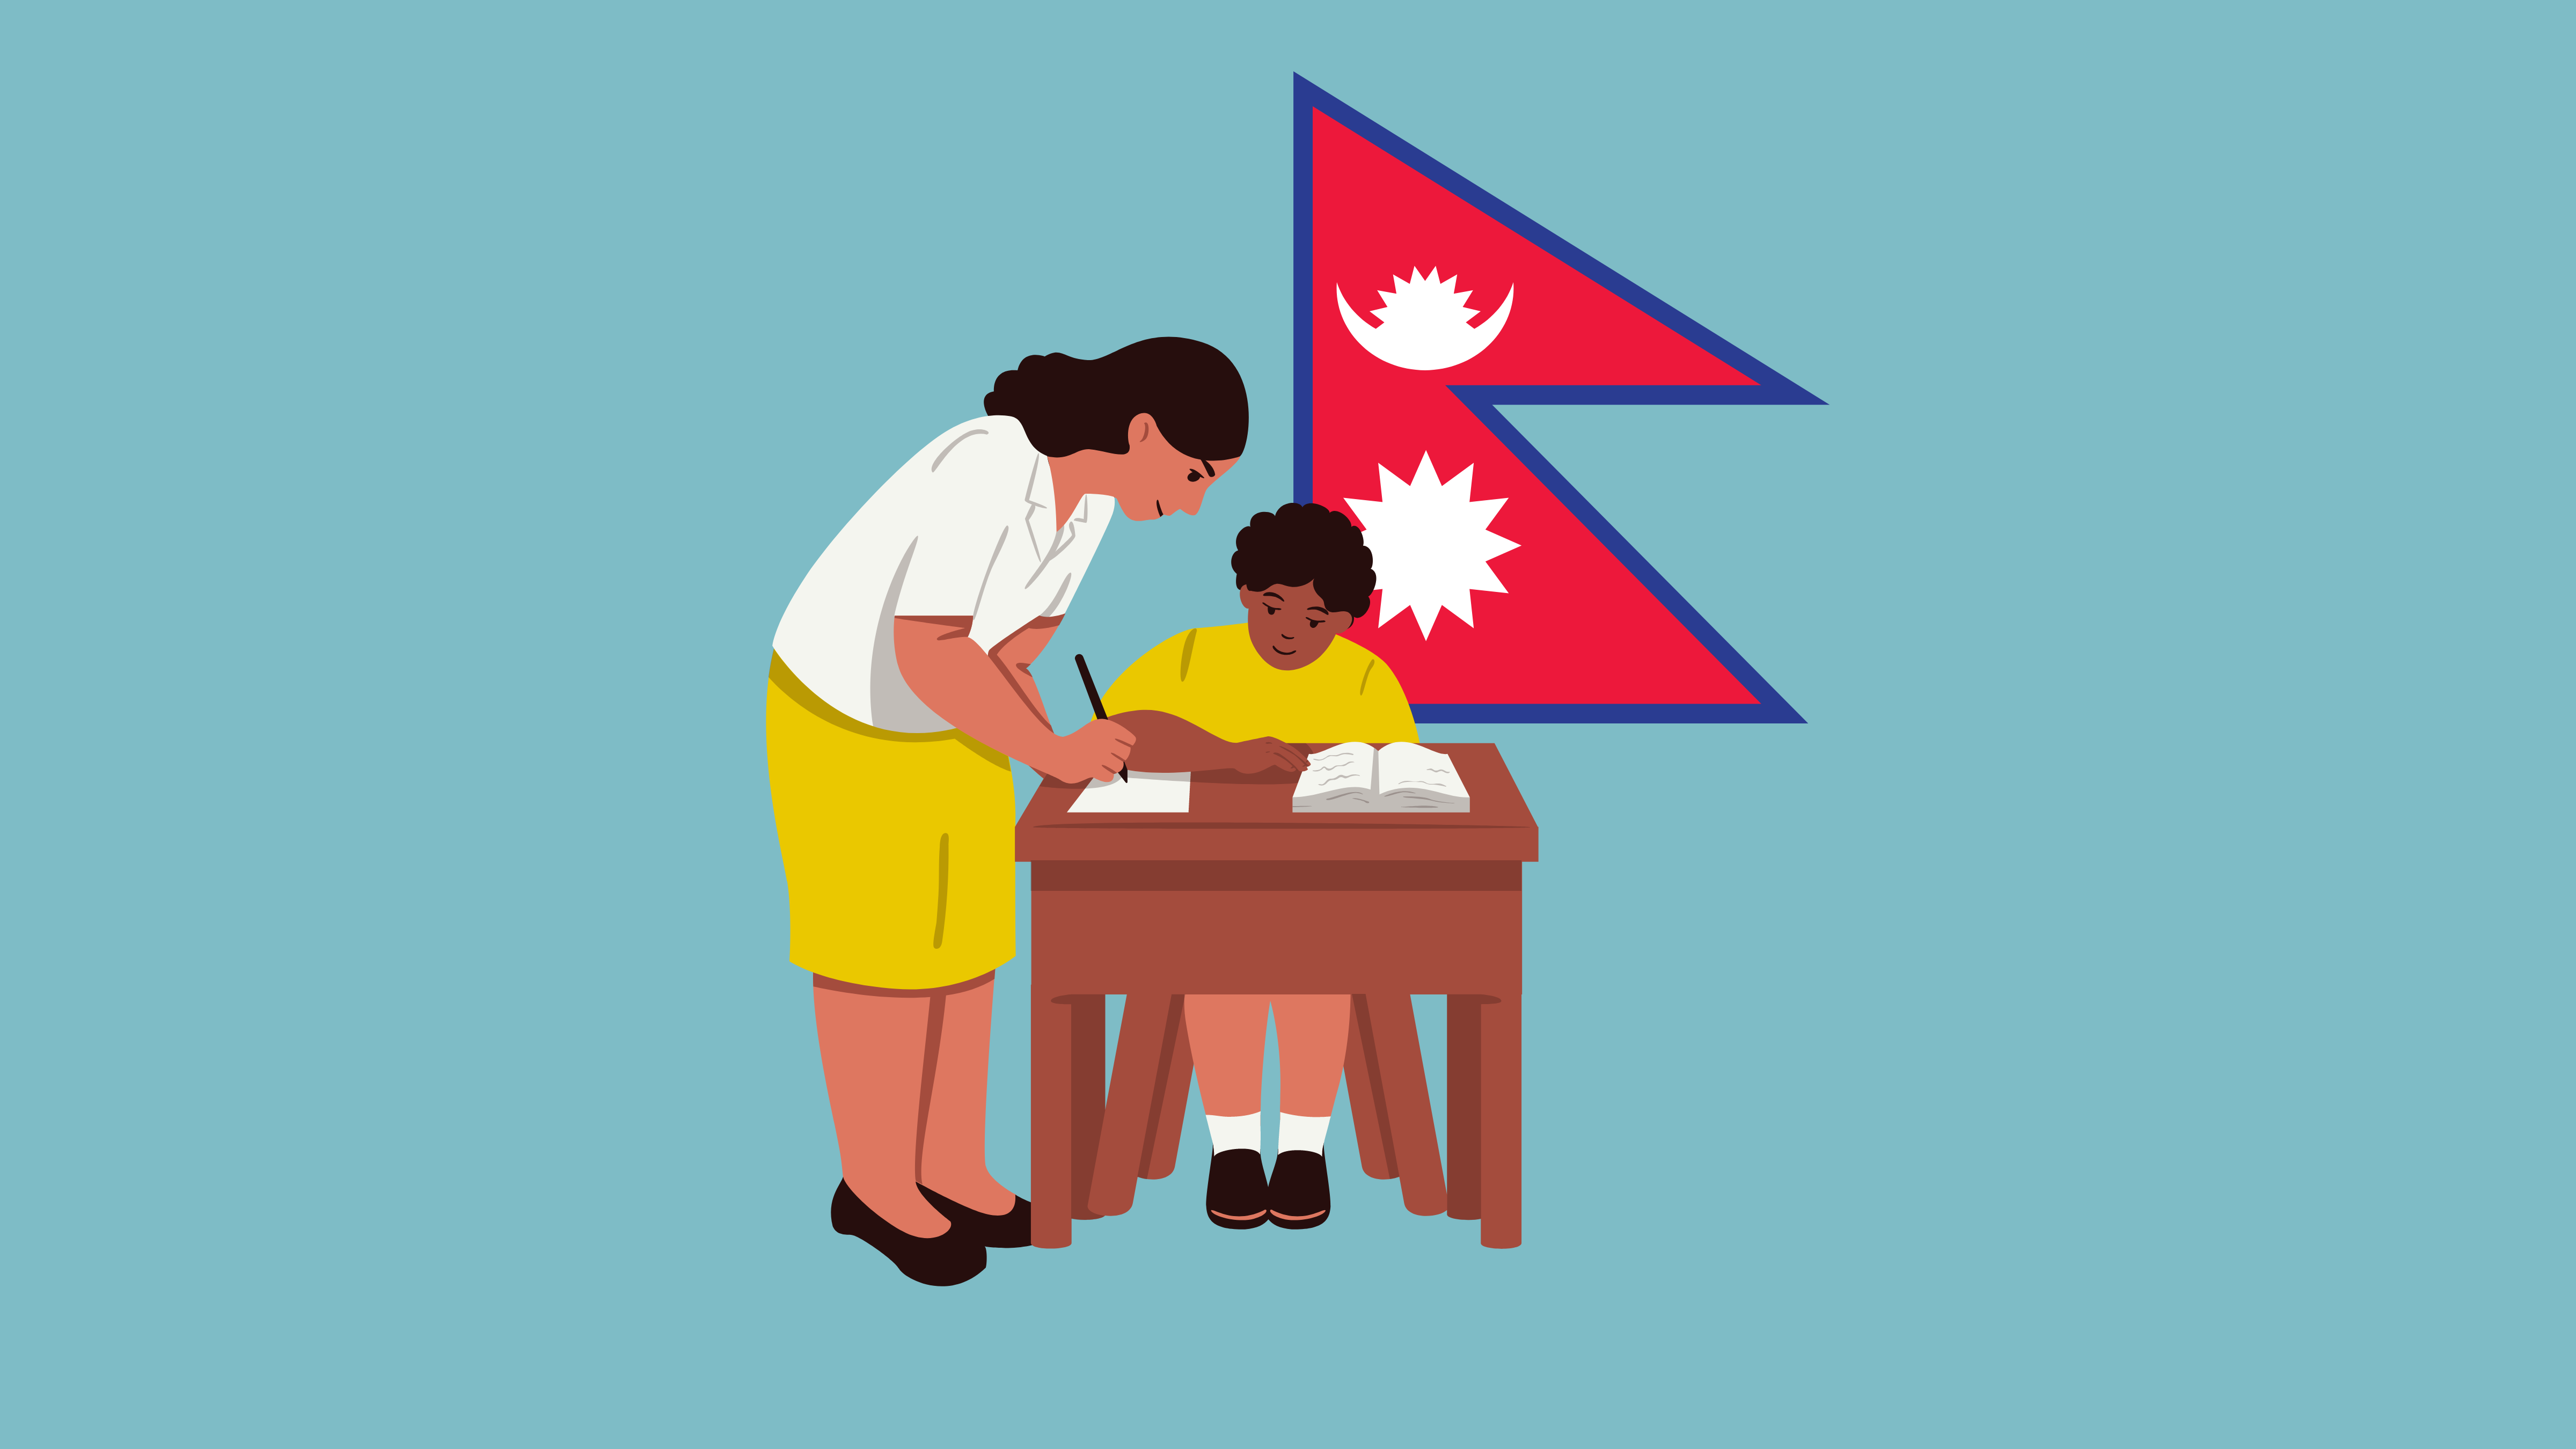 Teacher helping student study with nepal flag behind them